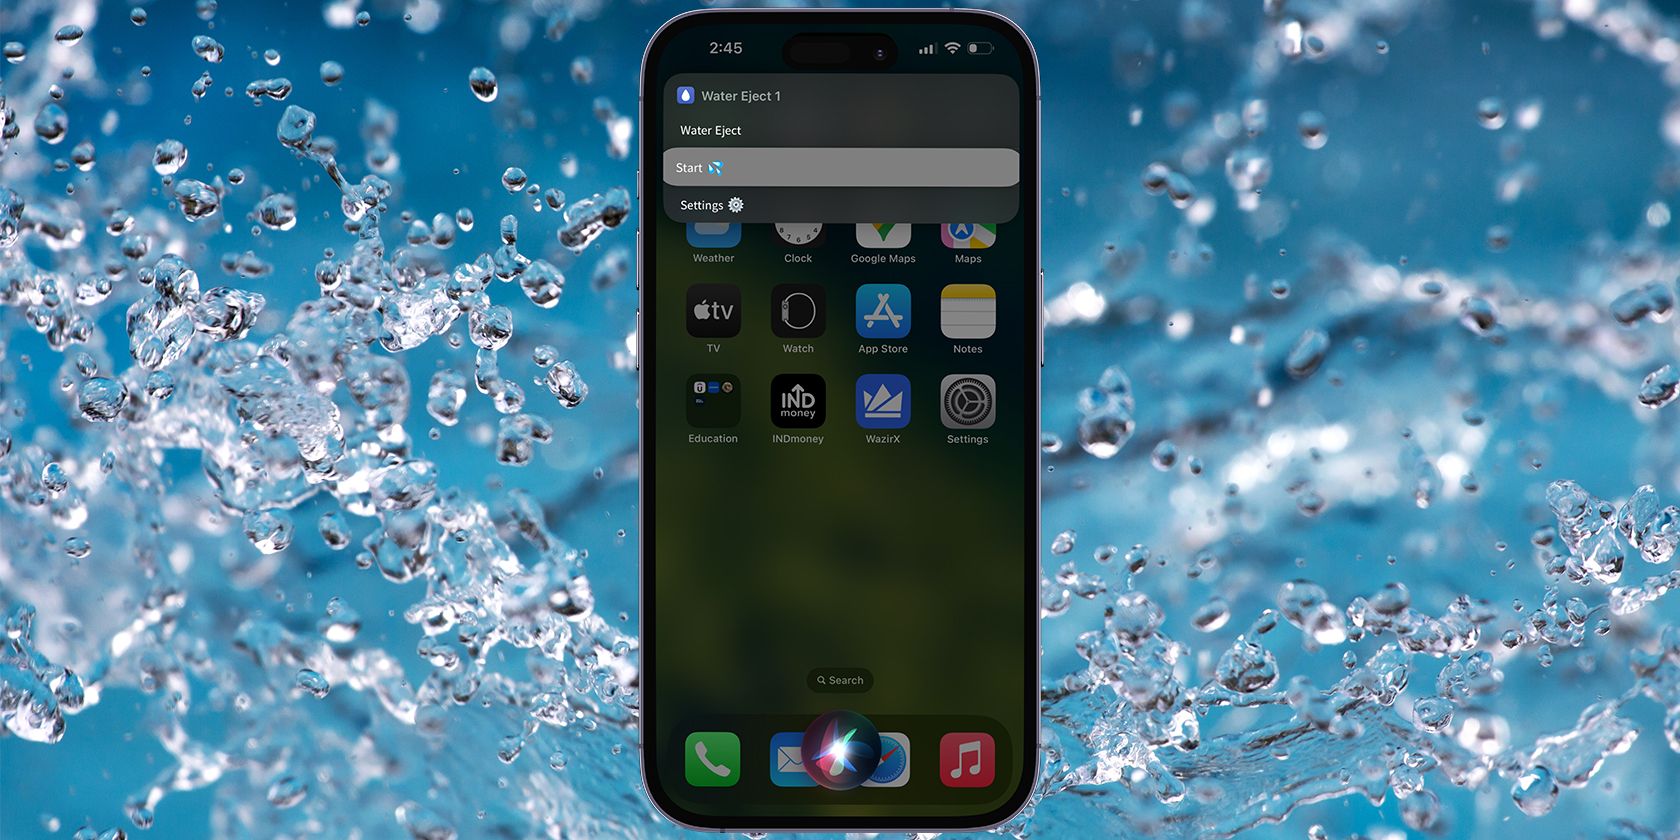 Water Eject shortcut running on an iPhone with water droplets in the background